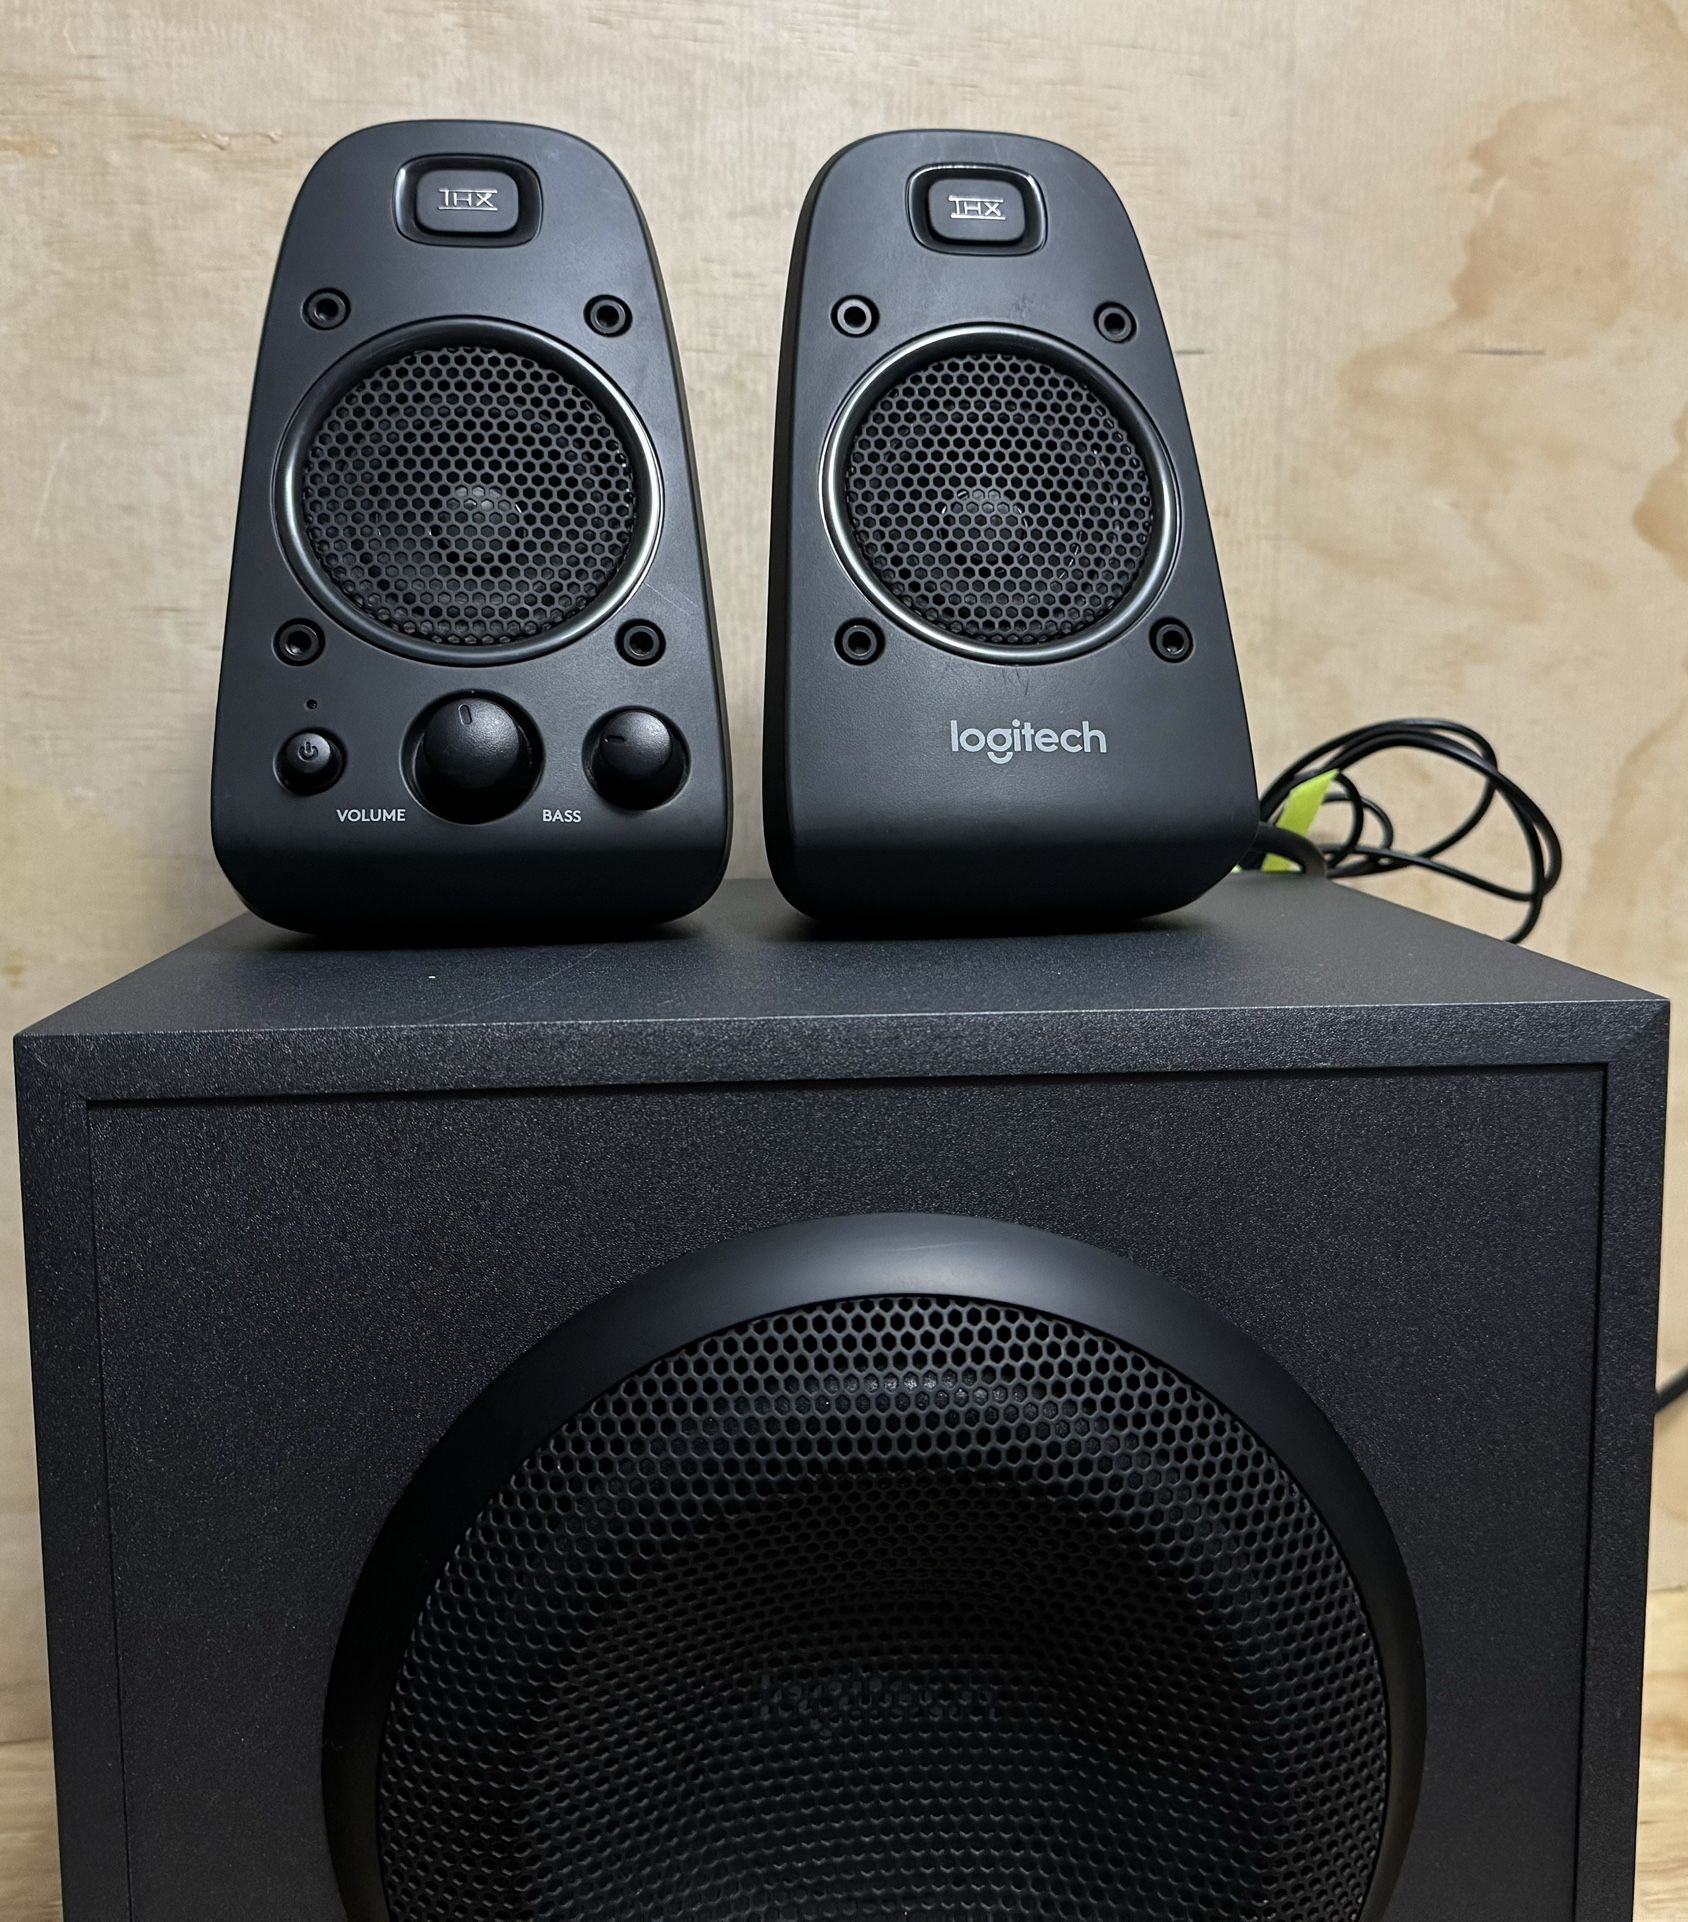 Logitech Z625 Speakers With Subwoofer 